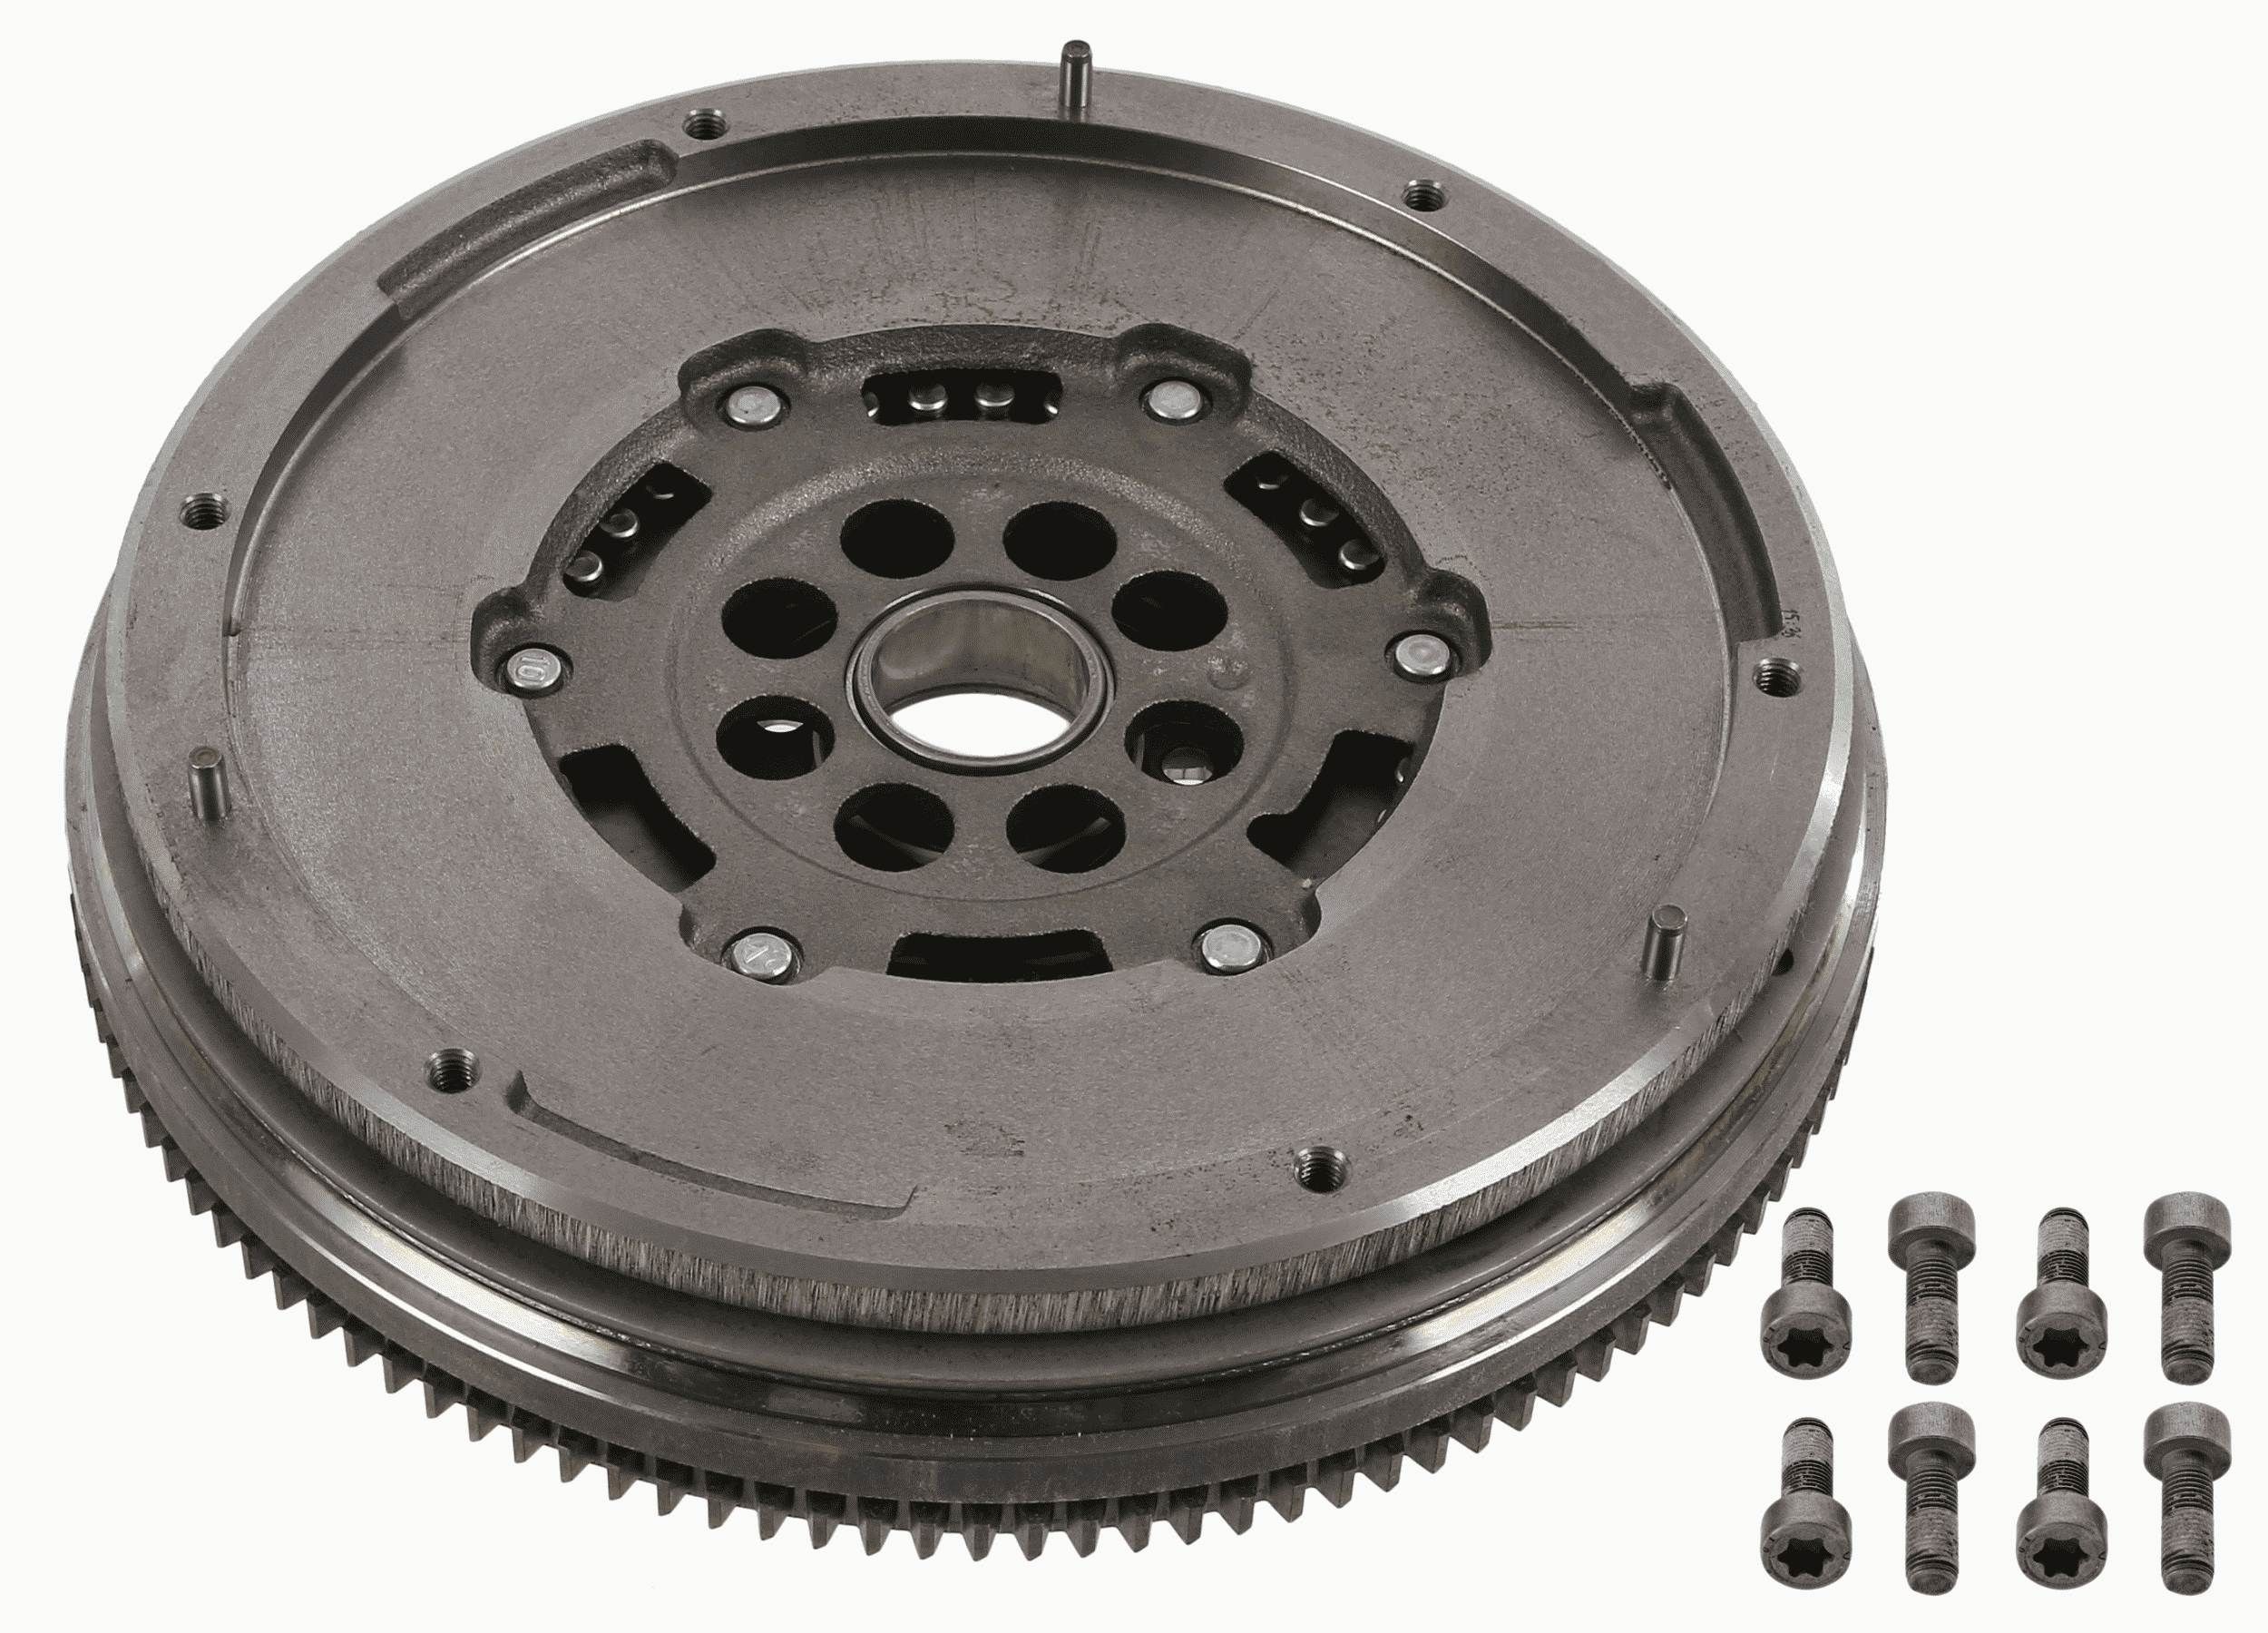 Dual flywheel clutch 2294 501 265 Ford FOCUS 2016 – buy replacement parts